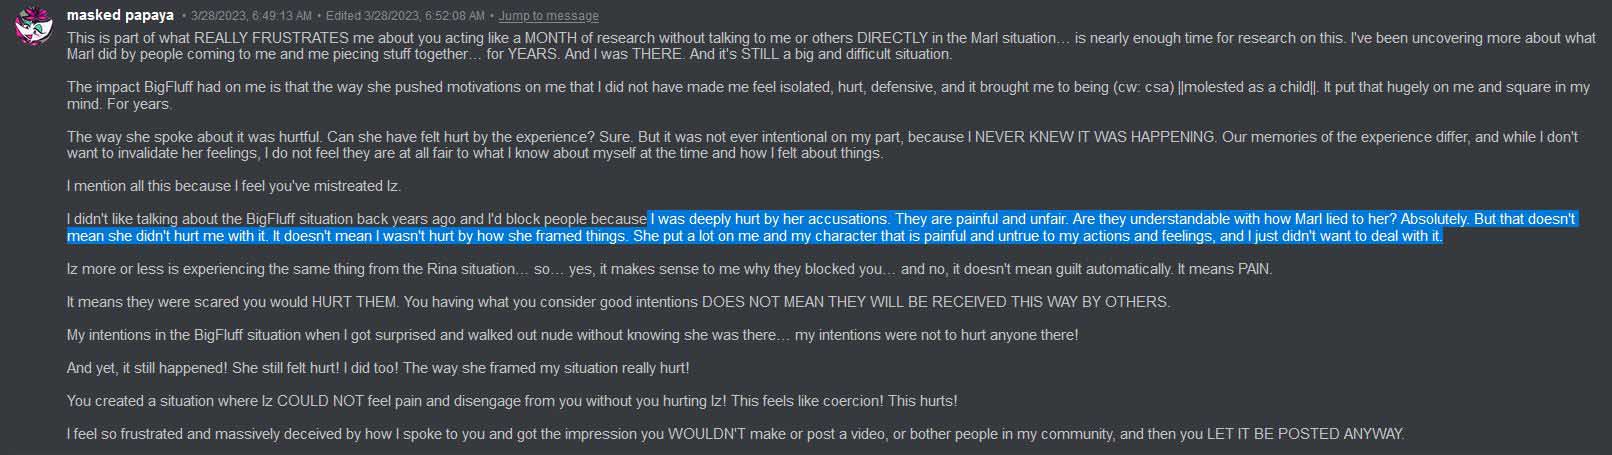 Glitchedpuppet says on Discord: 'This is part of what REALLY FRUSTRATES me about you acting like a MONTH of research without talking to me or others DIRECTLY in the Marl situation… is nearly enough time for research on this. I've been uncovering more about what Marl did by people coming to me and me piecing stuff together… for YEARS. And I was THERE. And it's STILL a big and difficult situation. The impact BigFluff had on me is that the way she pushed motivations on me that I did not have made me feel isolated, hurt, defensive, and it brought me to being (cw: csa) ||molested as a child||. It put that hugely on me and square in my mind. For years. The way she spoke about it was hurtful. Can she have felt hurt by the experience? Sure. But it was not ever intentional on my part, because I NEVER KNEW IT WAS HAPPENING. Our memories of the experience differ, and while I don't want to invalidate her feelings, I do not feel they are at all fair to what I know about myself at the time and how I felt about things. I mention all this because I feel you've mistreated Iz. I didn't like talking about the BigFluff situation back years ago and I'd block people because I was deeply hurt by her accusations. They are painful and unfair. Are they understandable with how Marl lied to her? Absolutely. But that doesn't mean she didn't hurt me with it. It doesn't mean I wasn't hurt by how she framed things. She put a lot on me and my character that is painful and untrue to my actions and feelings, and I just didn't want to deal with it. Iz more or less is experiencing the same thing from the Rina situation… so… yes, it makes sense to me why they blocked you… and no, it doesn't mean guilt automatically. It means PAIN. It means they were scared you would HURT THEM. You having what you consider good intentions DOES NOT MEAN THEY WILL BE RECEIVED THIS WAY BY OTHERS. My intentions in the BigFluff situation when I got surprised and walked out nude without knowing she was there… my intentions were not to hurt anyone there! And yet, it still happened! She still felt hurt! I did too! The way she framed my situation really hurt! You created a situation where Iz COULD NOT feel pain and disengage from you without you hurting Iz! This feels like coercion! This hurts! I feel so frustrated and massively deceived by how I spoke to you and got the impression you WOULDN'T make or post a video, or bother people in my community, and then you LET IT BE POSTED ANYWAY.'